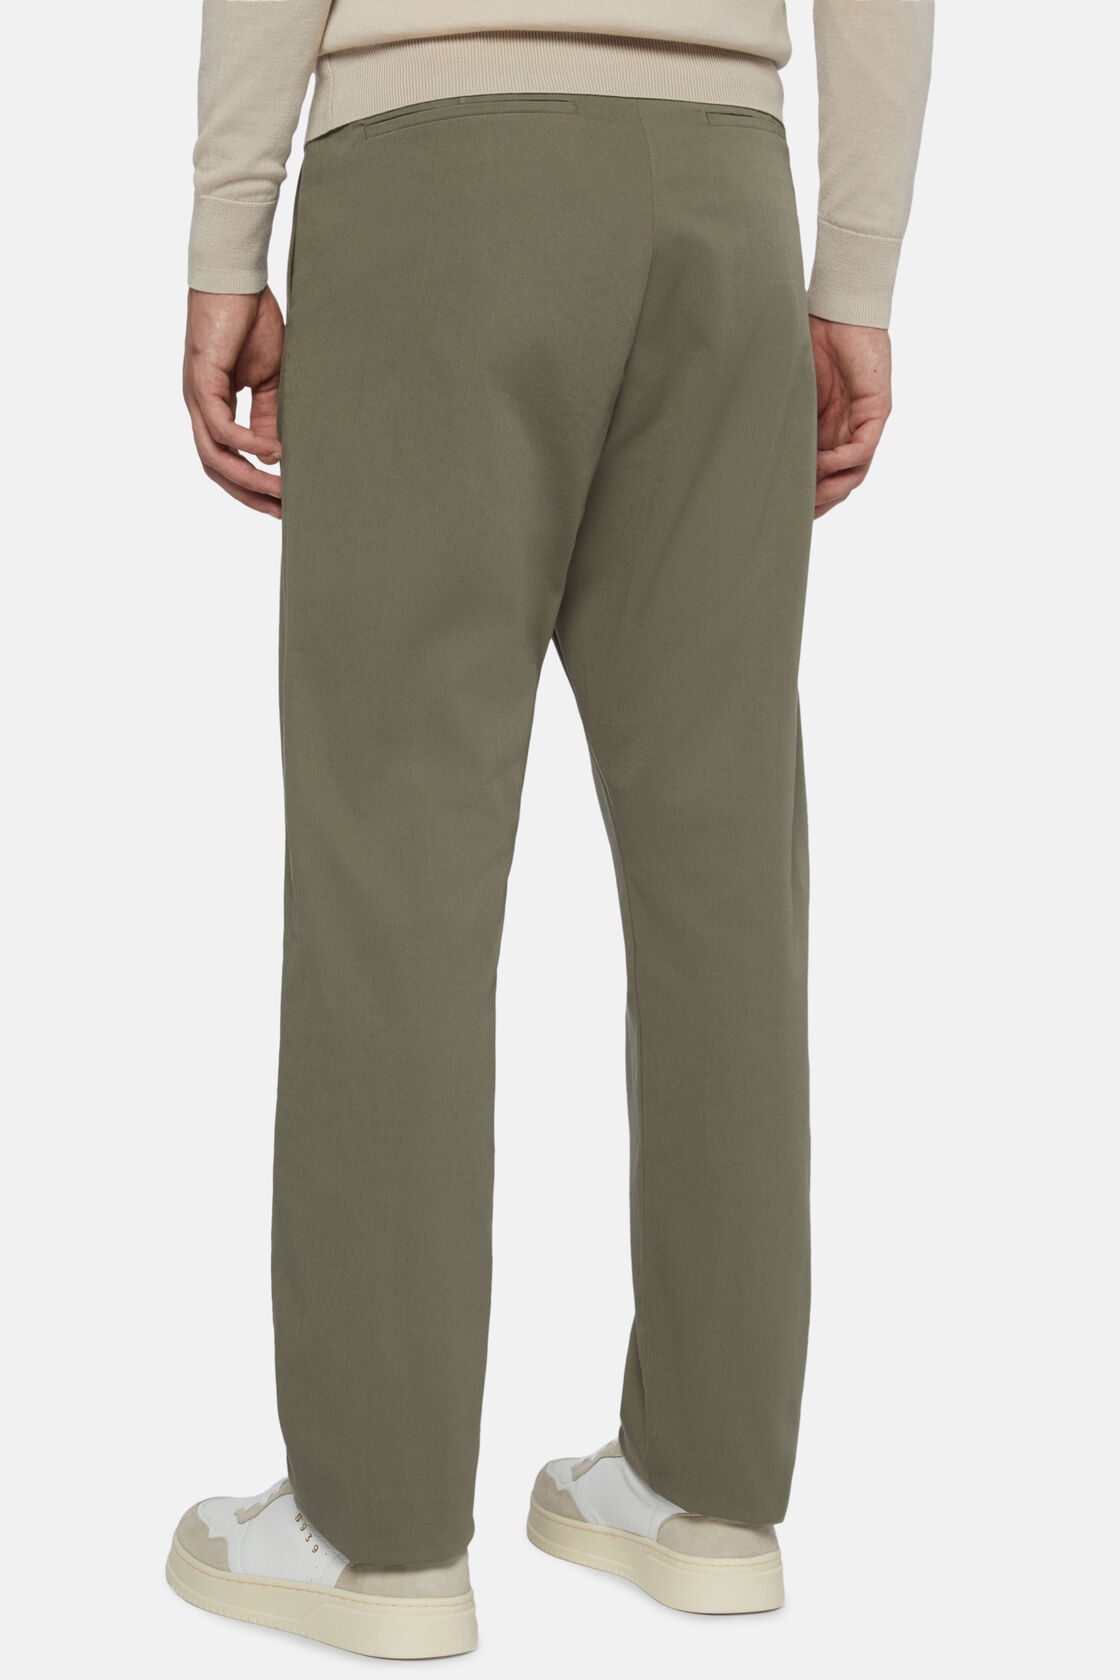 Stretch Cotton Trousers, Military Green, hi-res